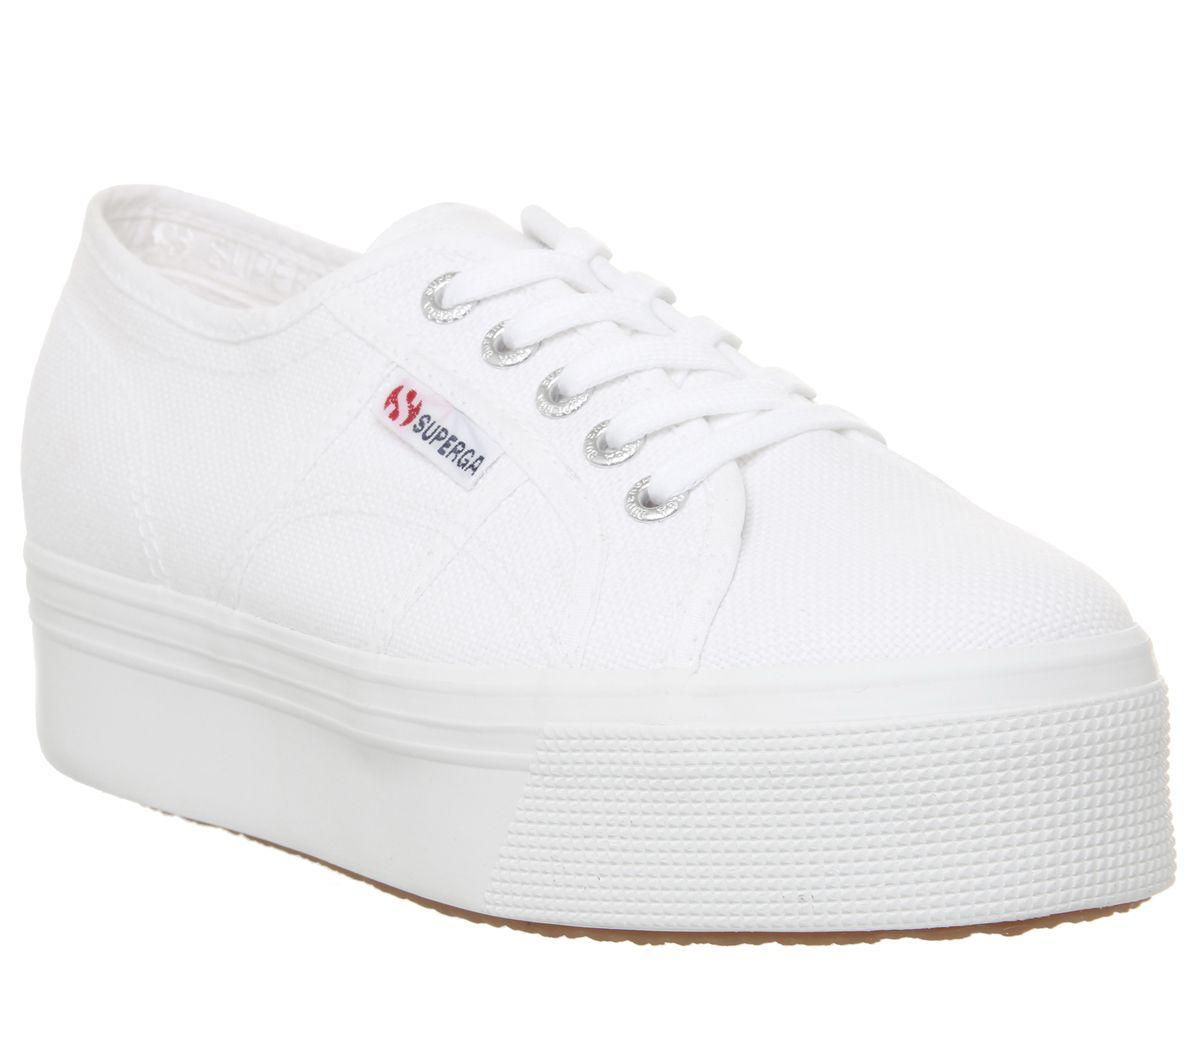 Superga 2790 Flatform Canvas Trainers in White - Save 58% - Lyst